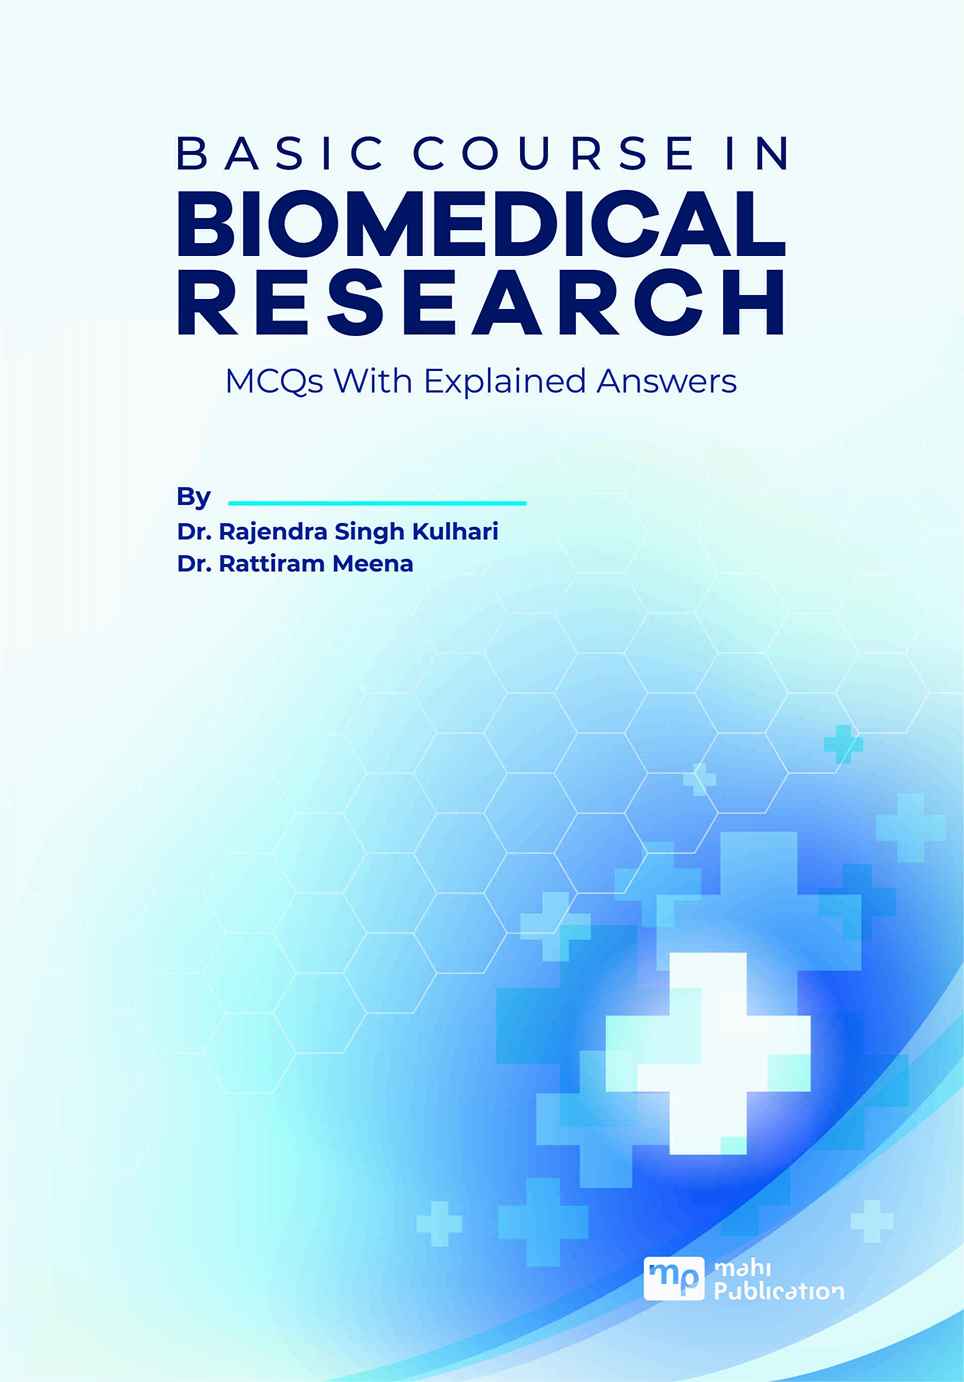 Basic Course In Biomedical Research Mcqs With Explained Answers